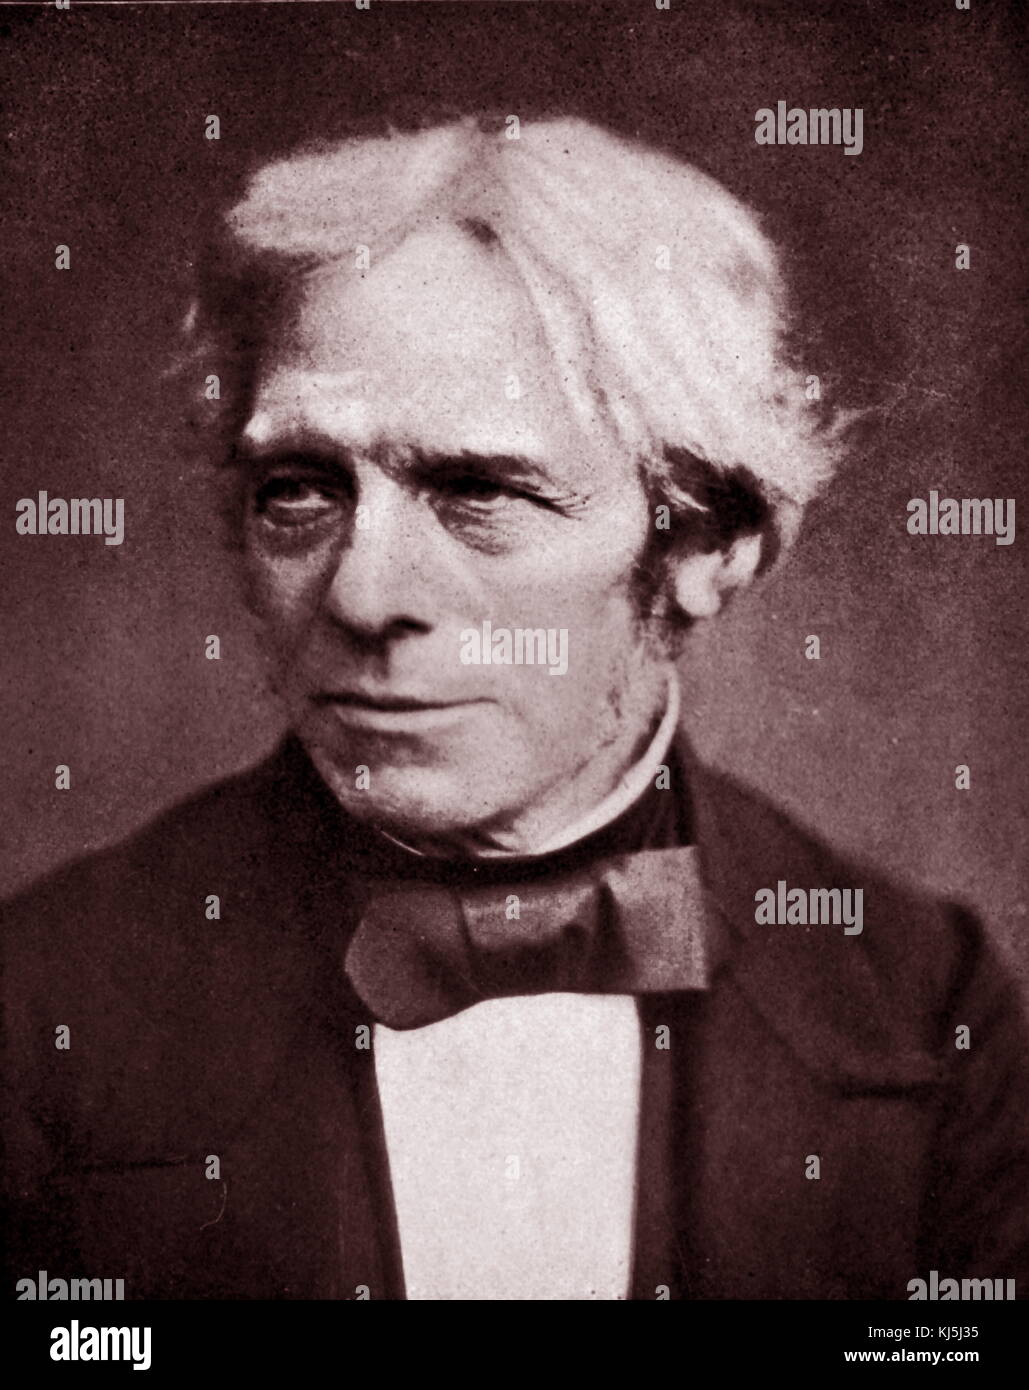 Michael Faraday 1791 – 1867; English scientist who contributed to the study of electromagnetism and electrochemistry. His main discoveries include the principles underlying electromagnetic induction, diamagnetism and electrolysis. Stock Photo